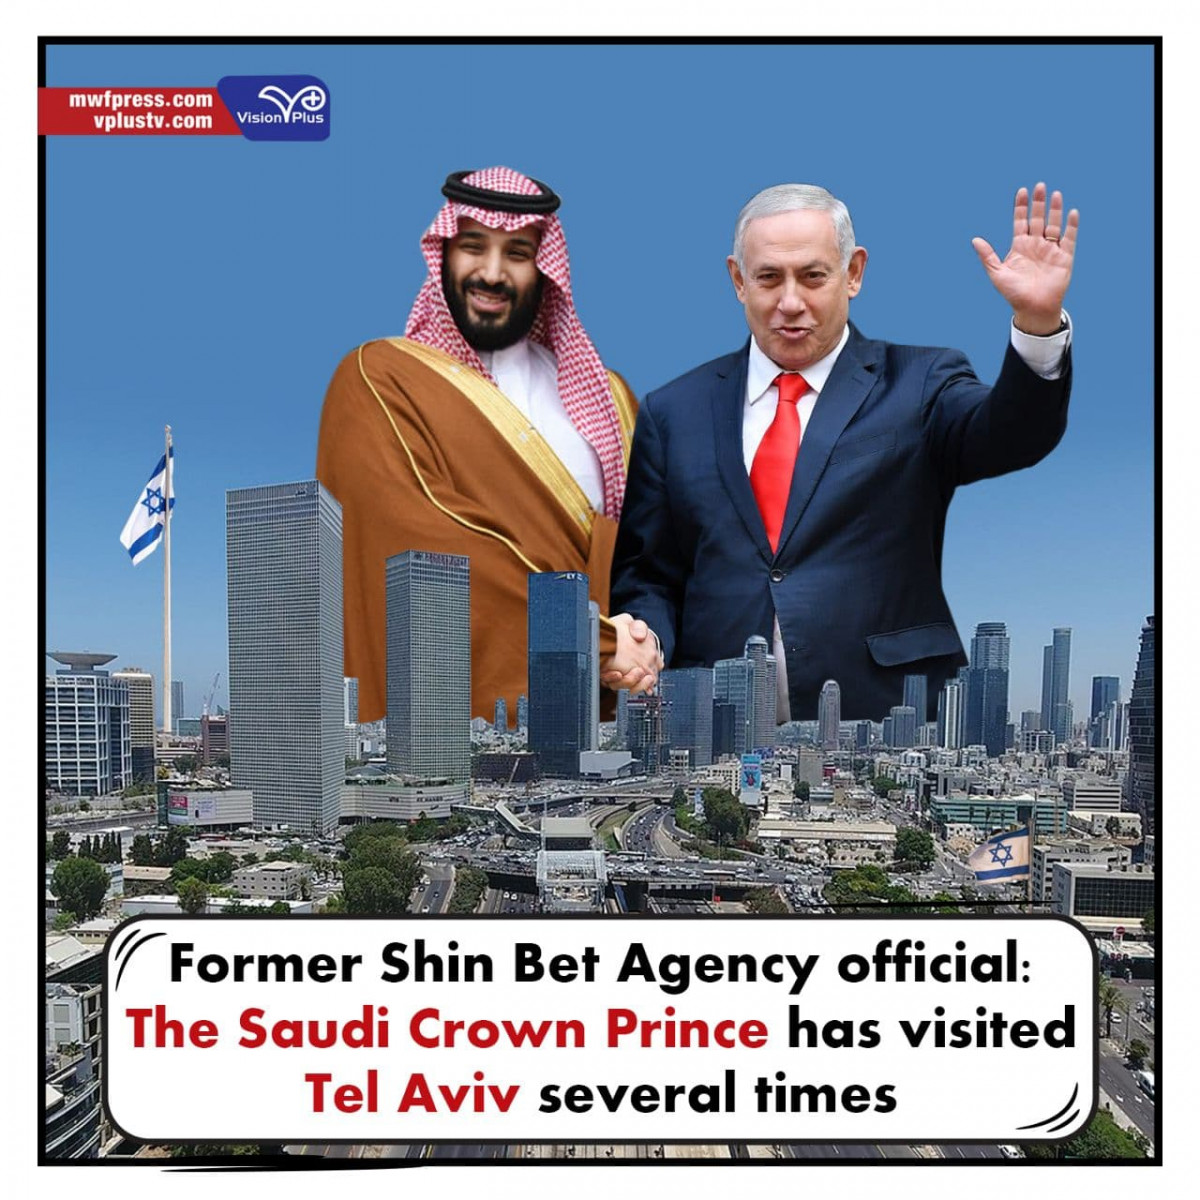 Former Shin Bet Agency official: The Saudi Crown Prince has visited Tel Aviv several times